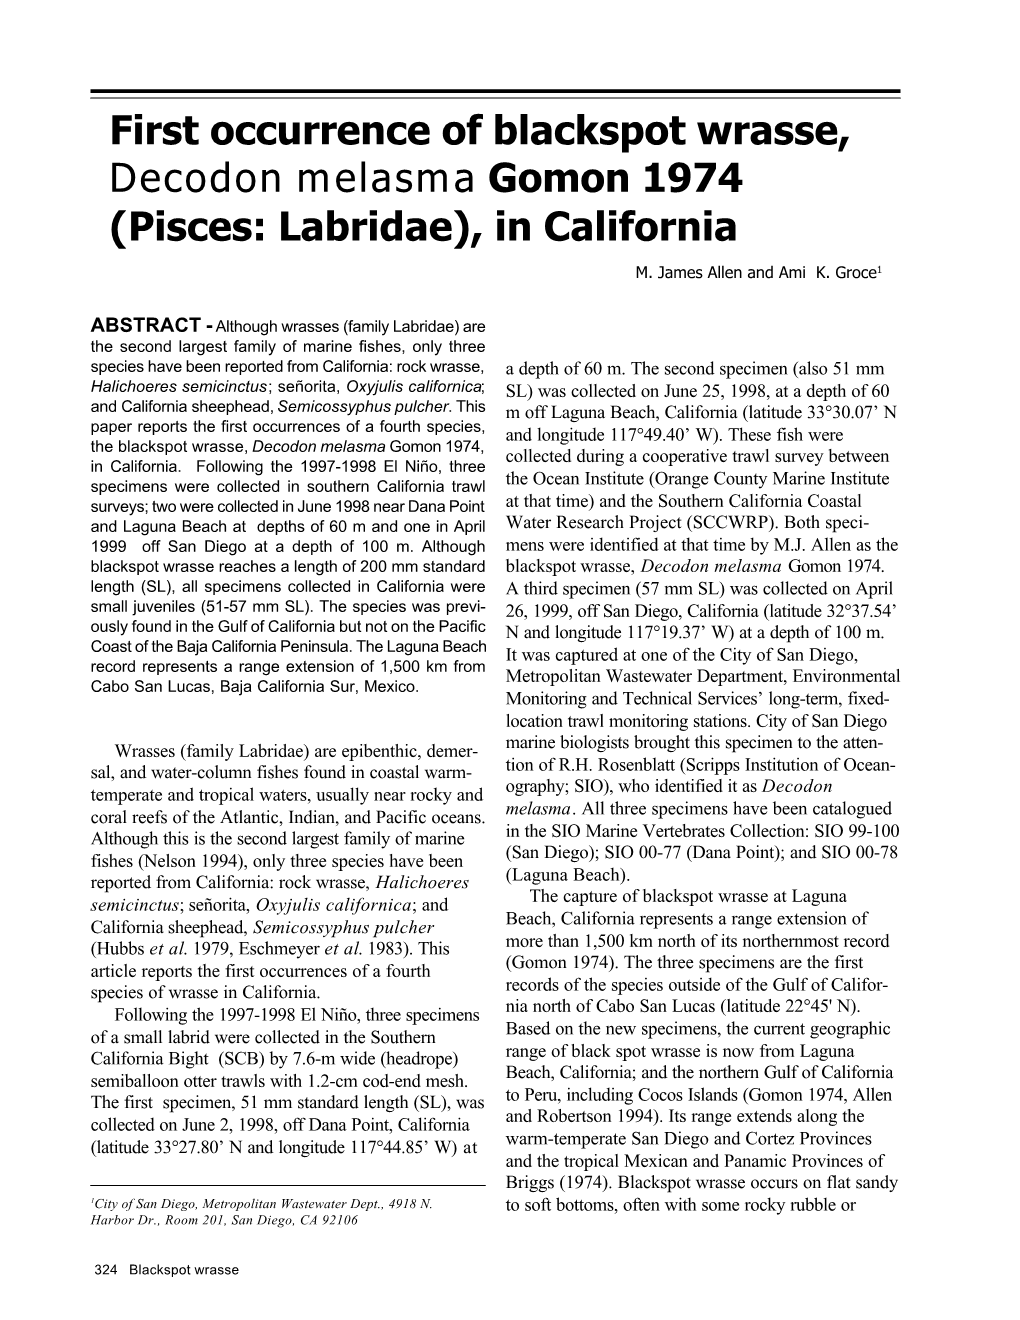 First Occurrence of Blackspot Wrasse, Decodon Melasma Gomon 1974 (Pisces: Labridae), in California